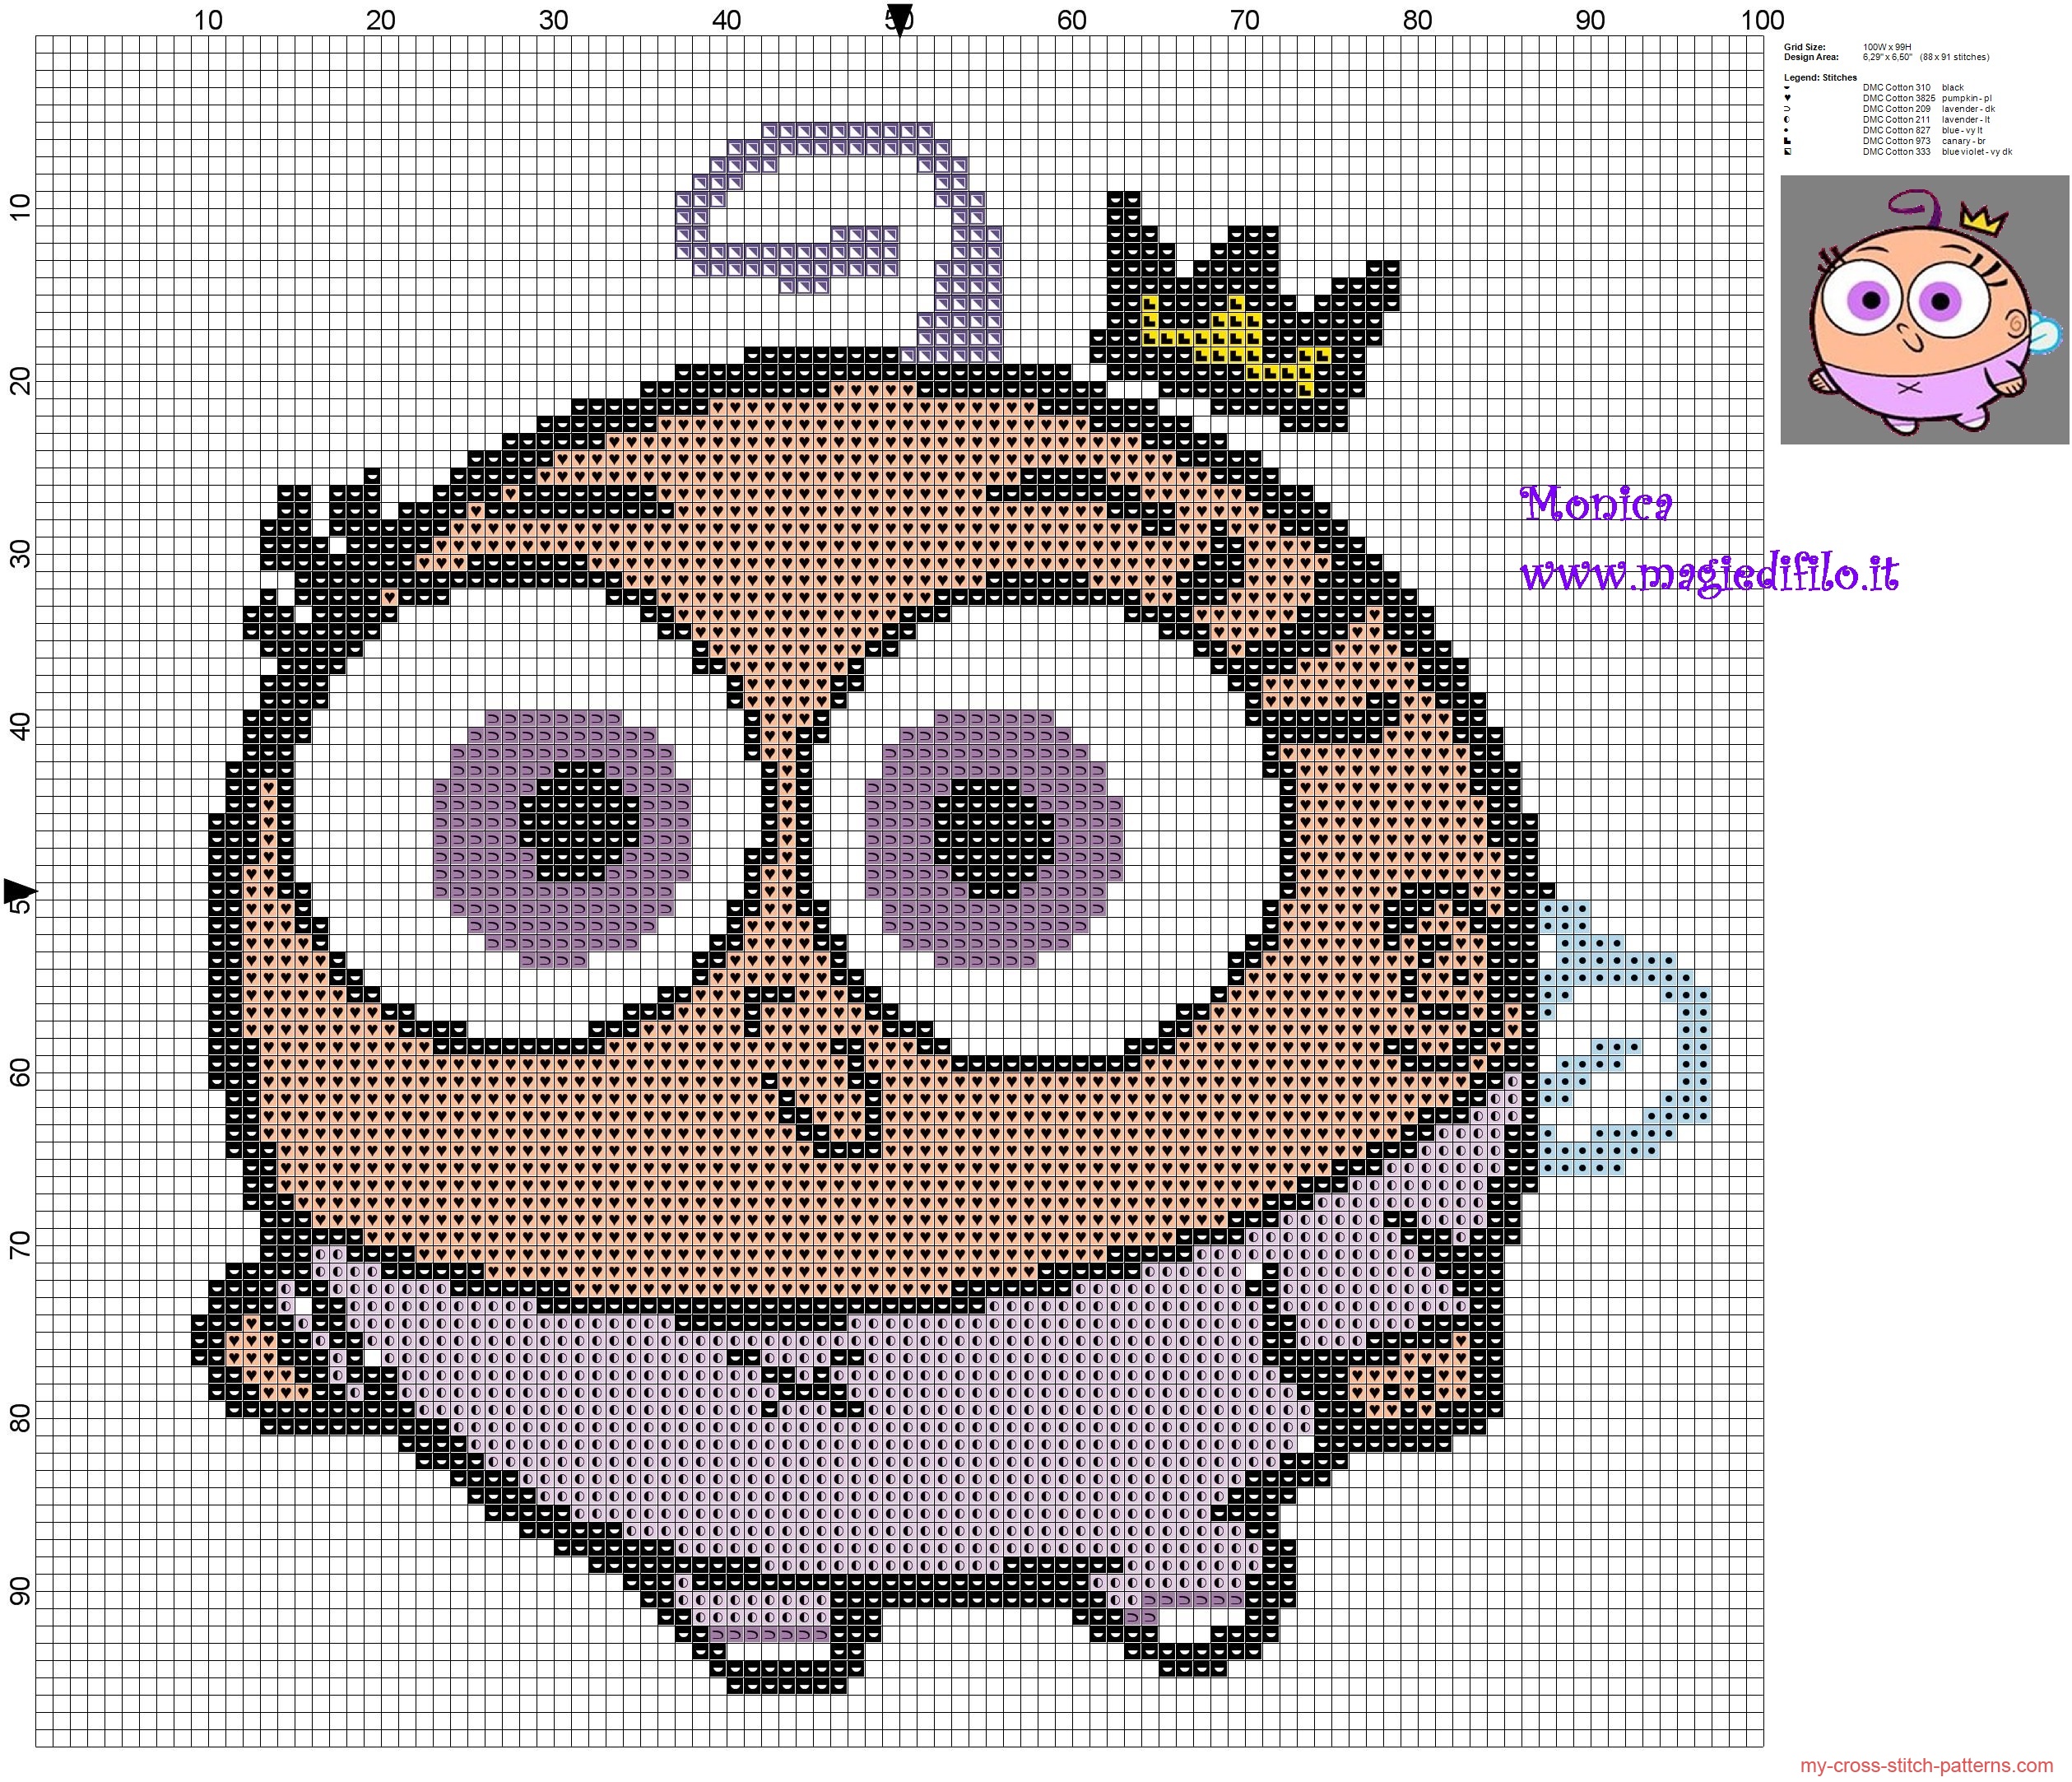 poof_the_fairly_oddparents_cross_stitch_pattern